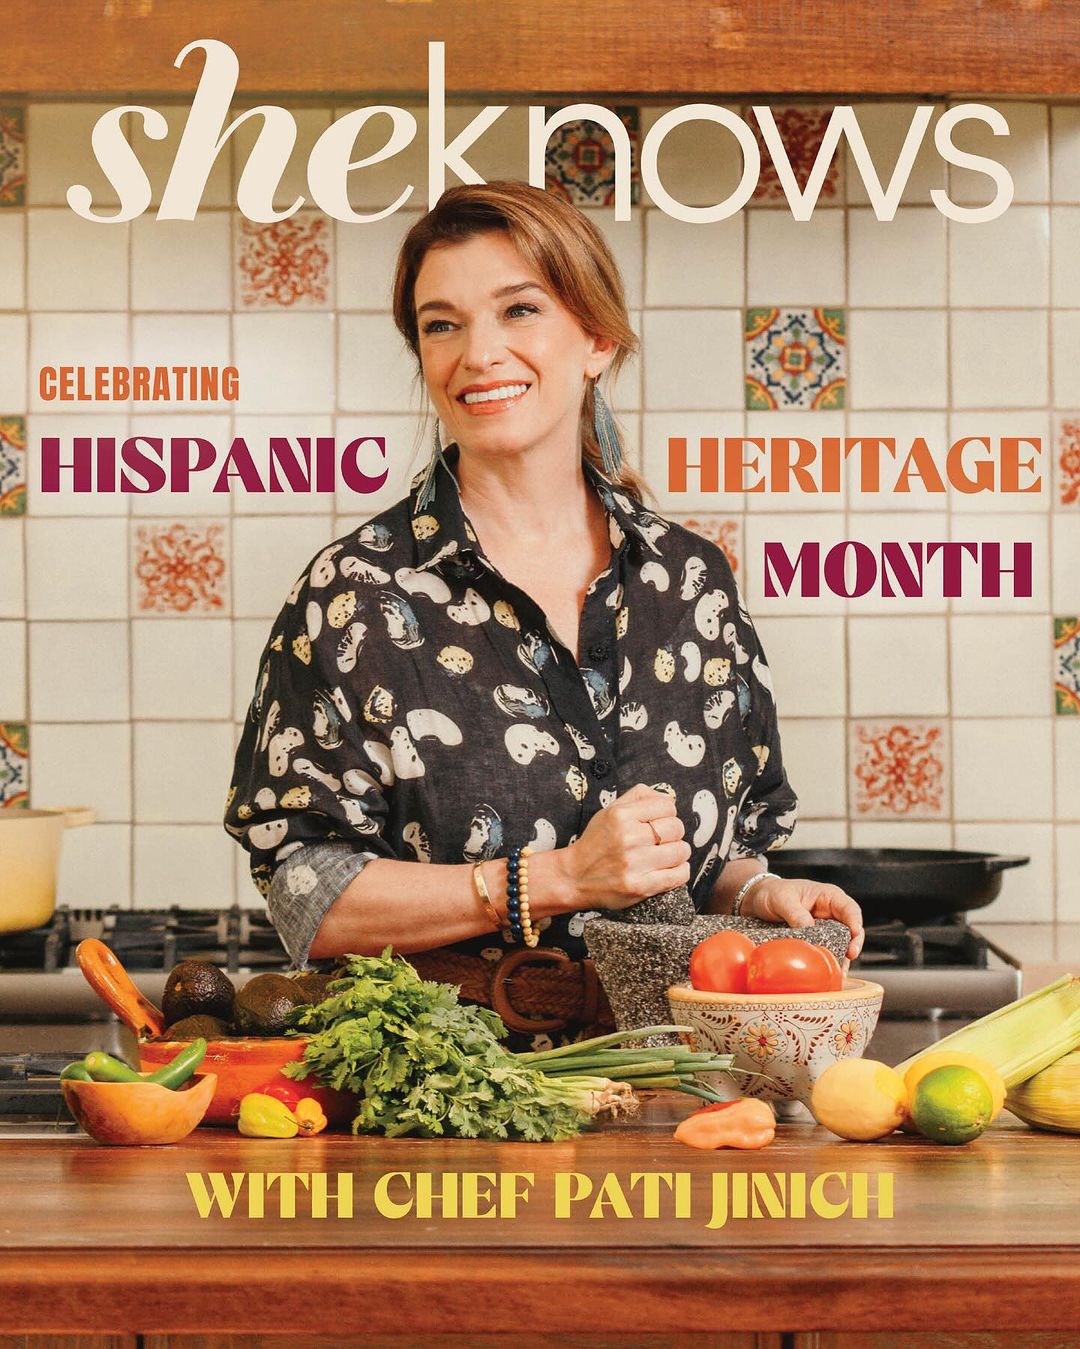 Pati Jinch on the cover of She Knows magazine